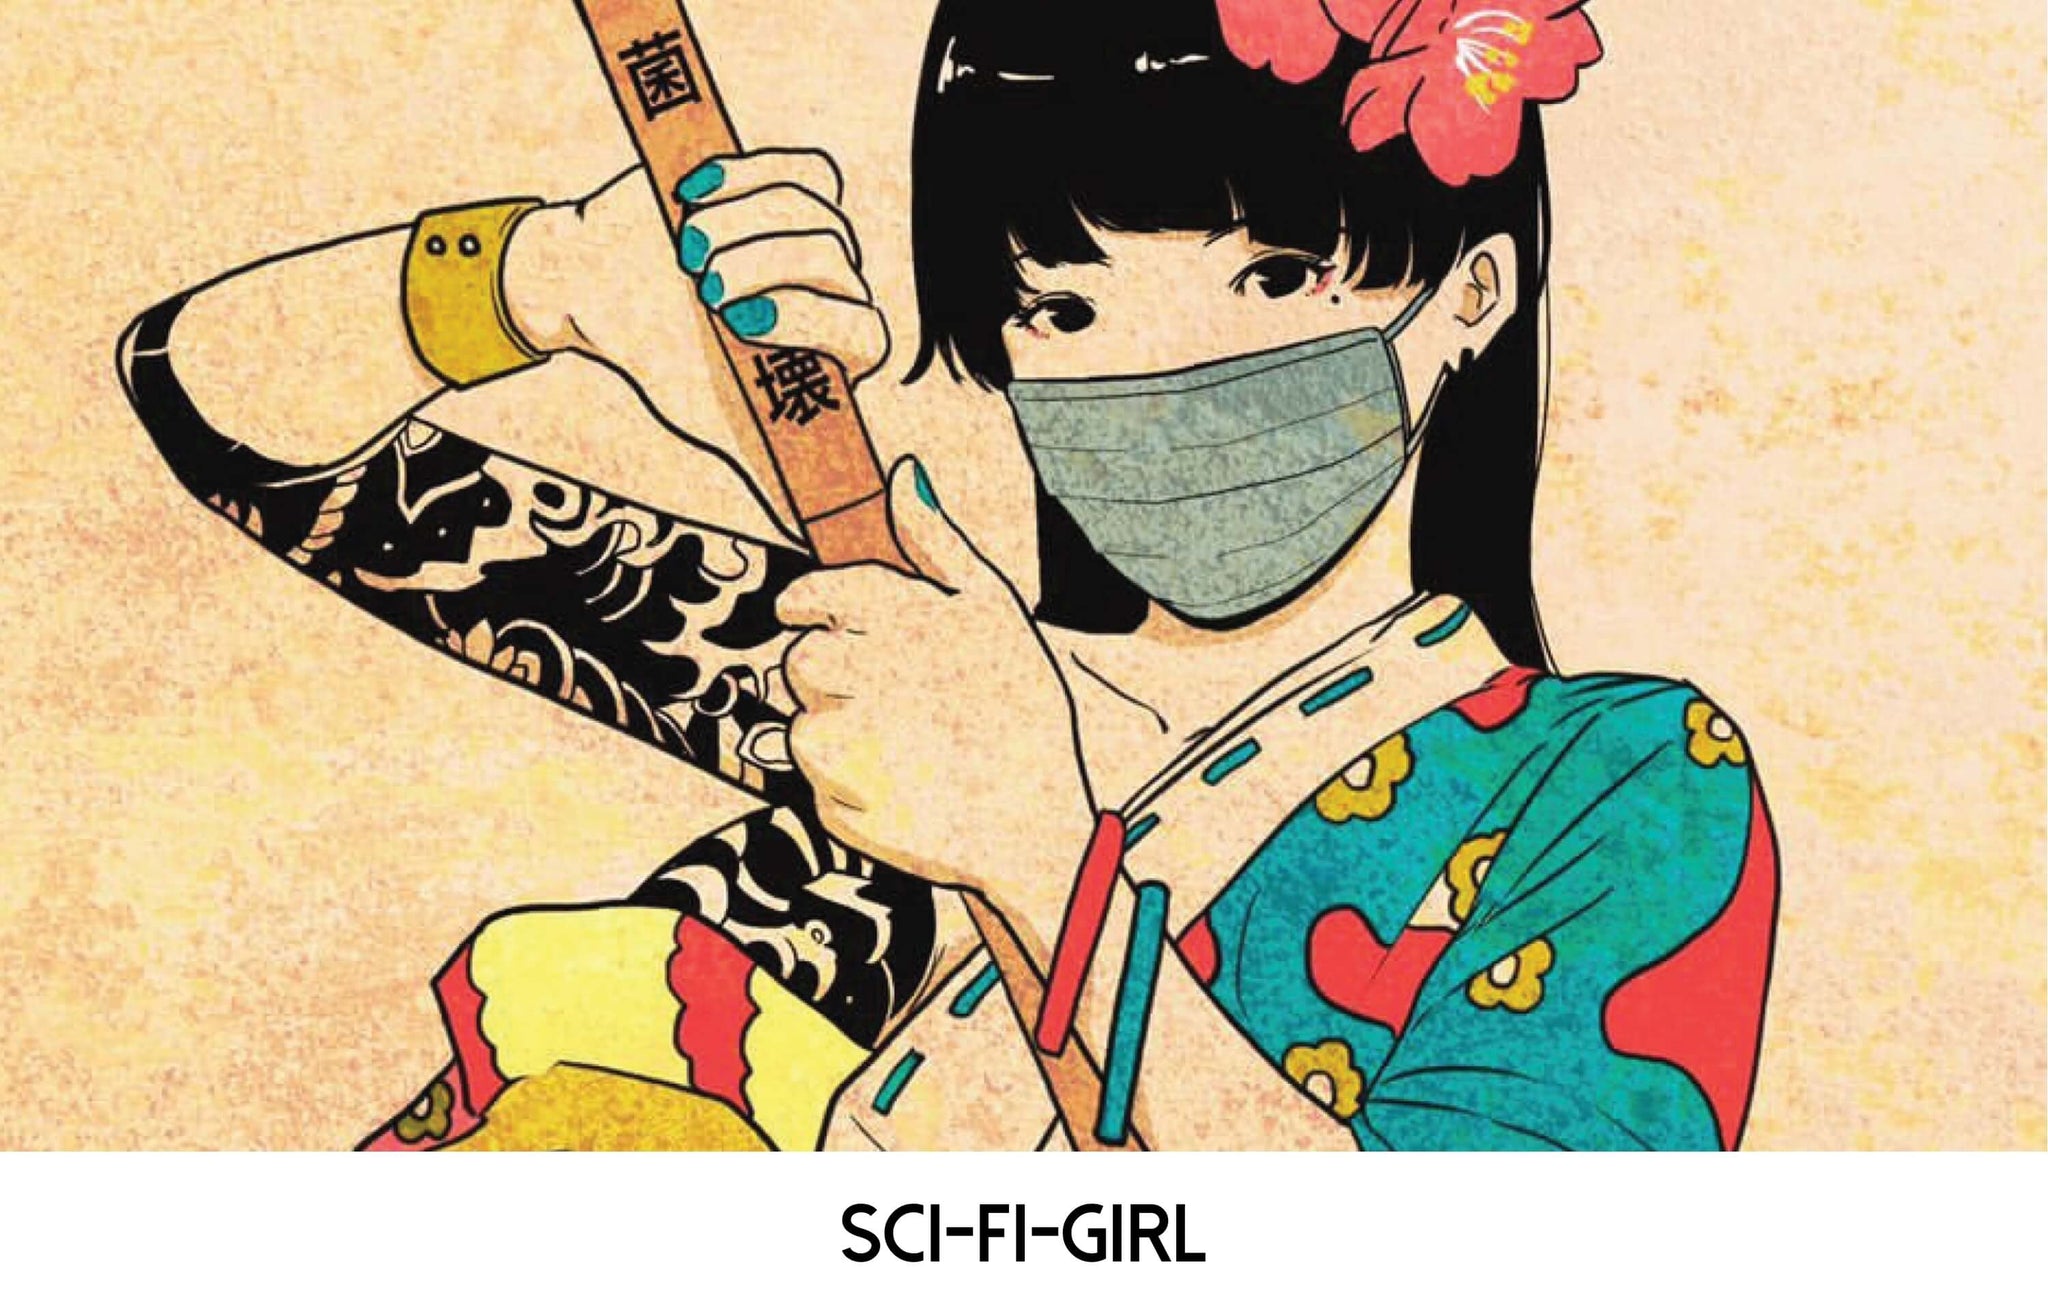 Learn more about Japanese artist Sci Fi Girl.